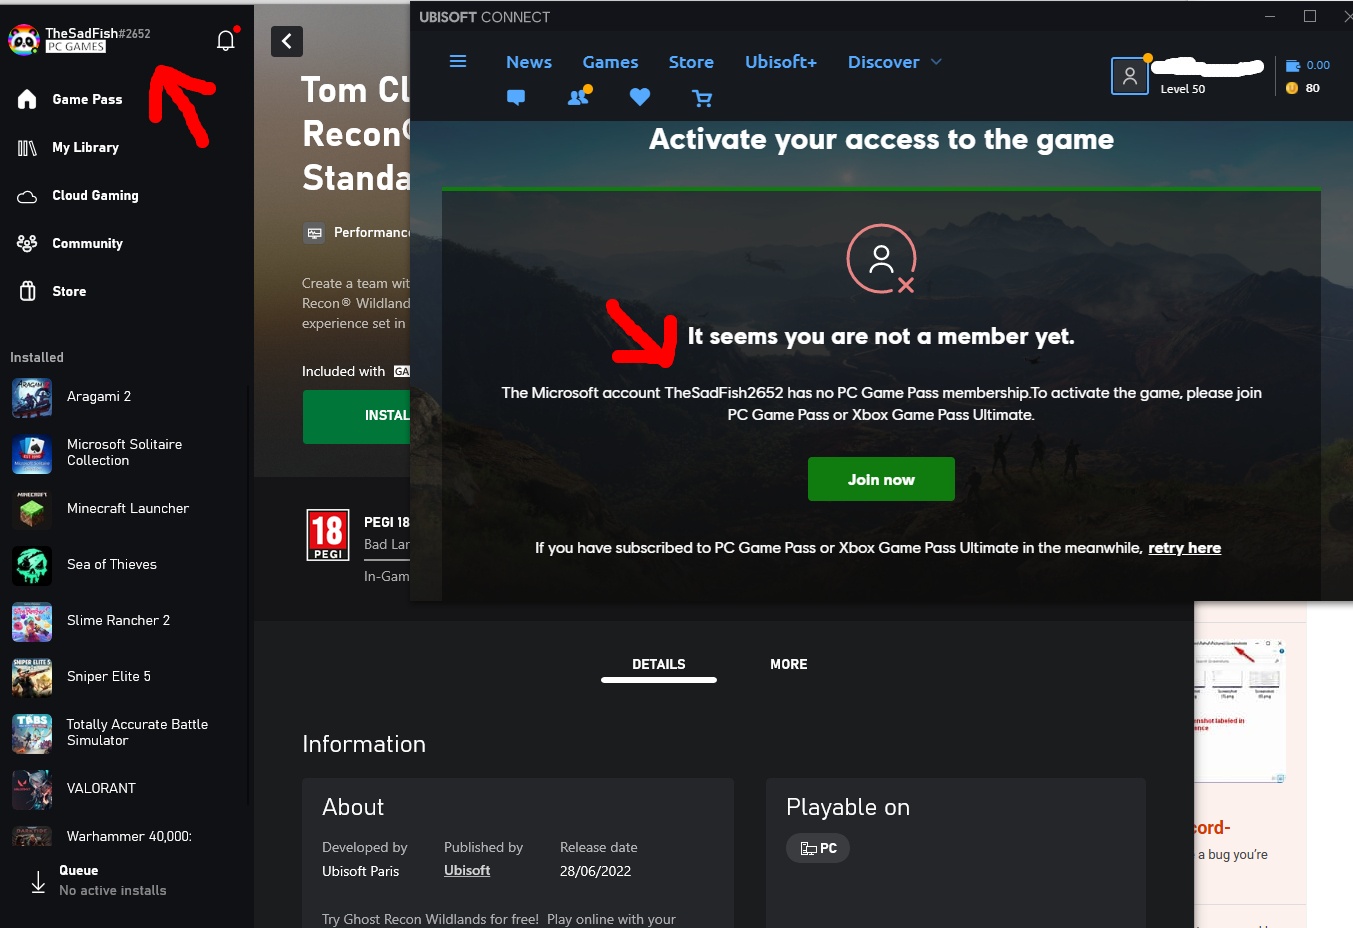 How do I activate my Xbox Game Pass?